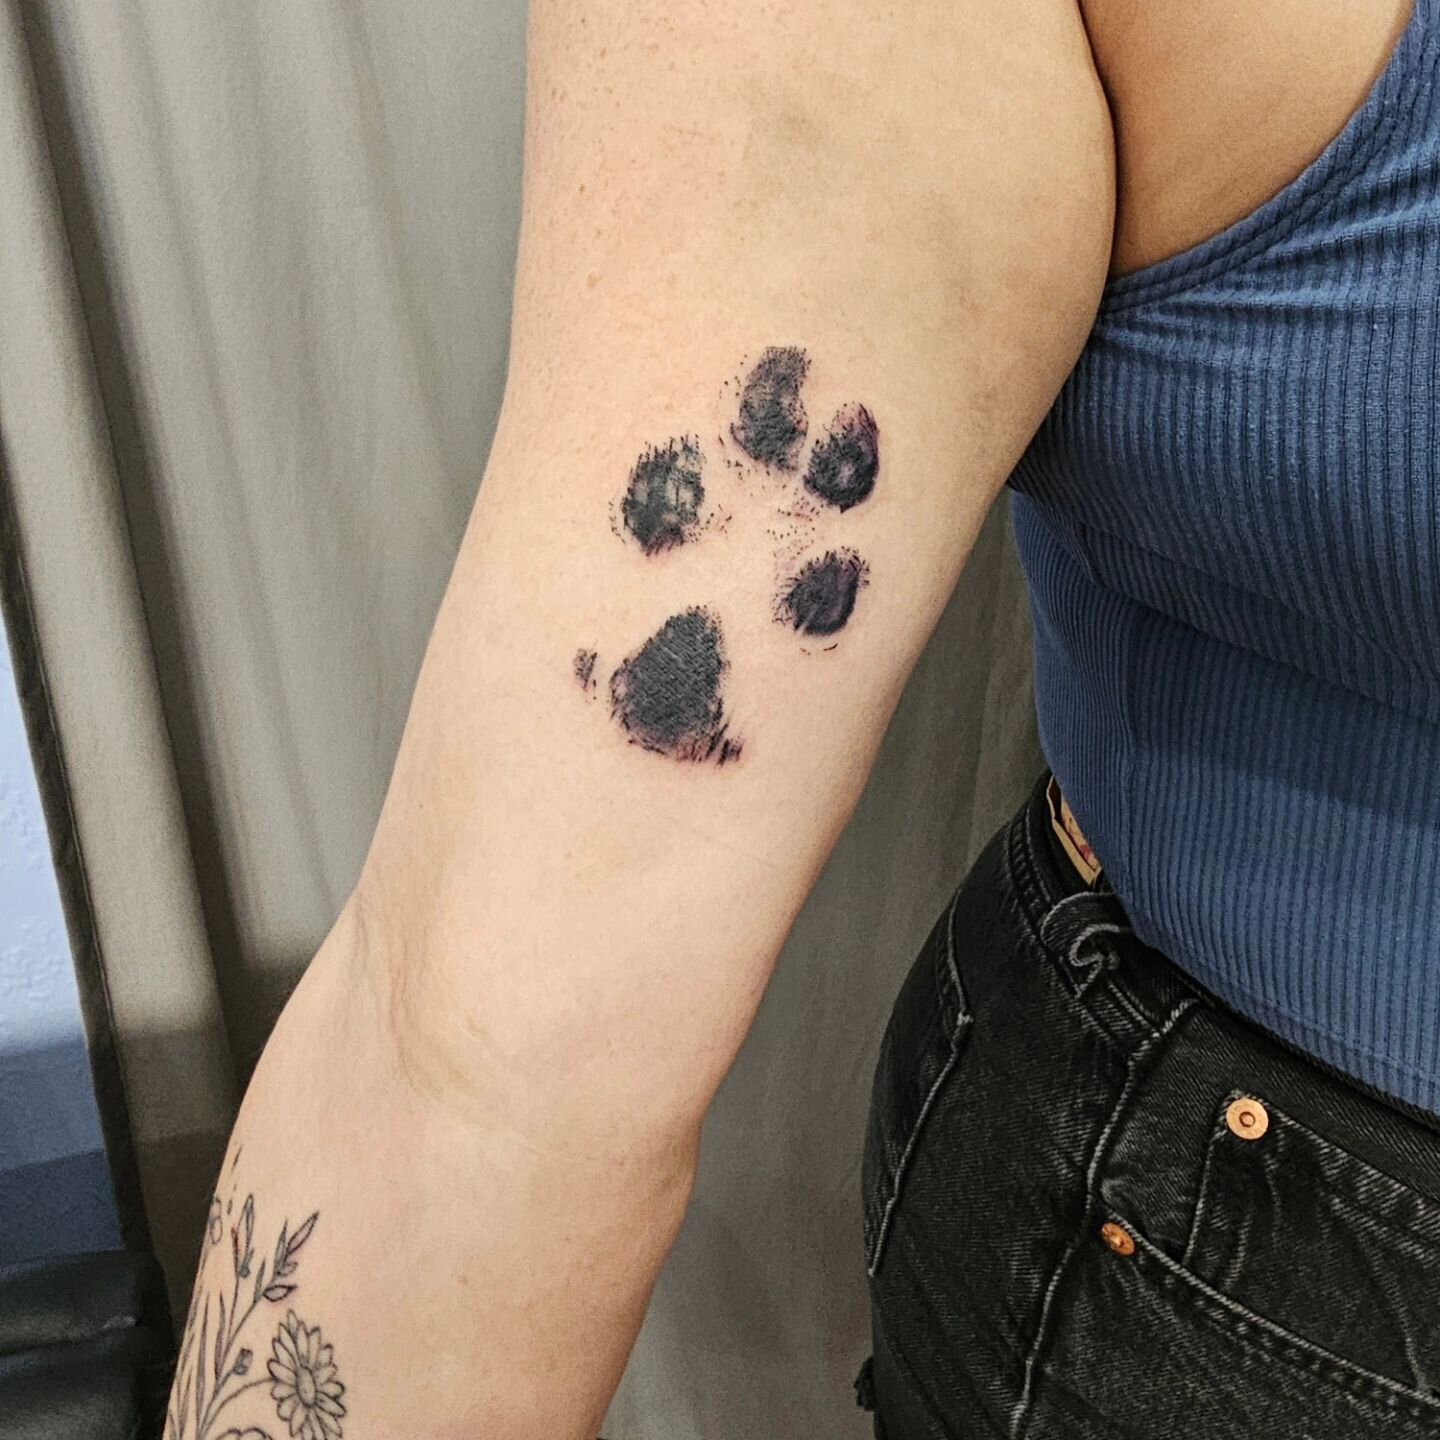 Memorial for a loving companion. Give your pups a little head pat from me tonight if you can, cherish your animal friends while you have them ❤️🐾

Come see me at @robotpiercingtattoo , walk ins available. DM or text preferred for contact in my pinne